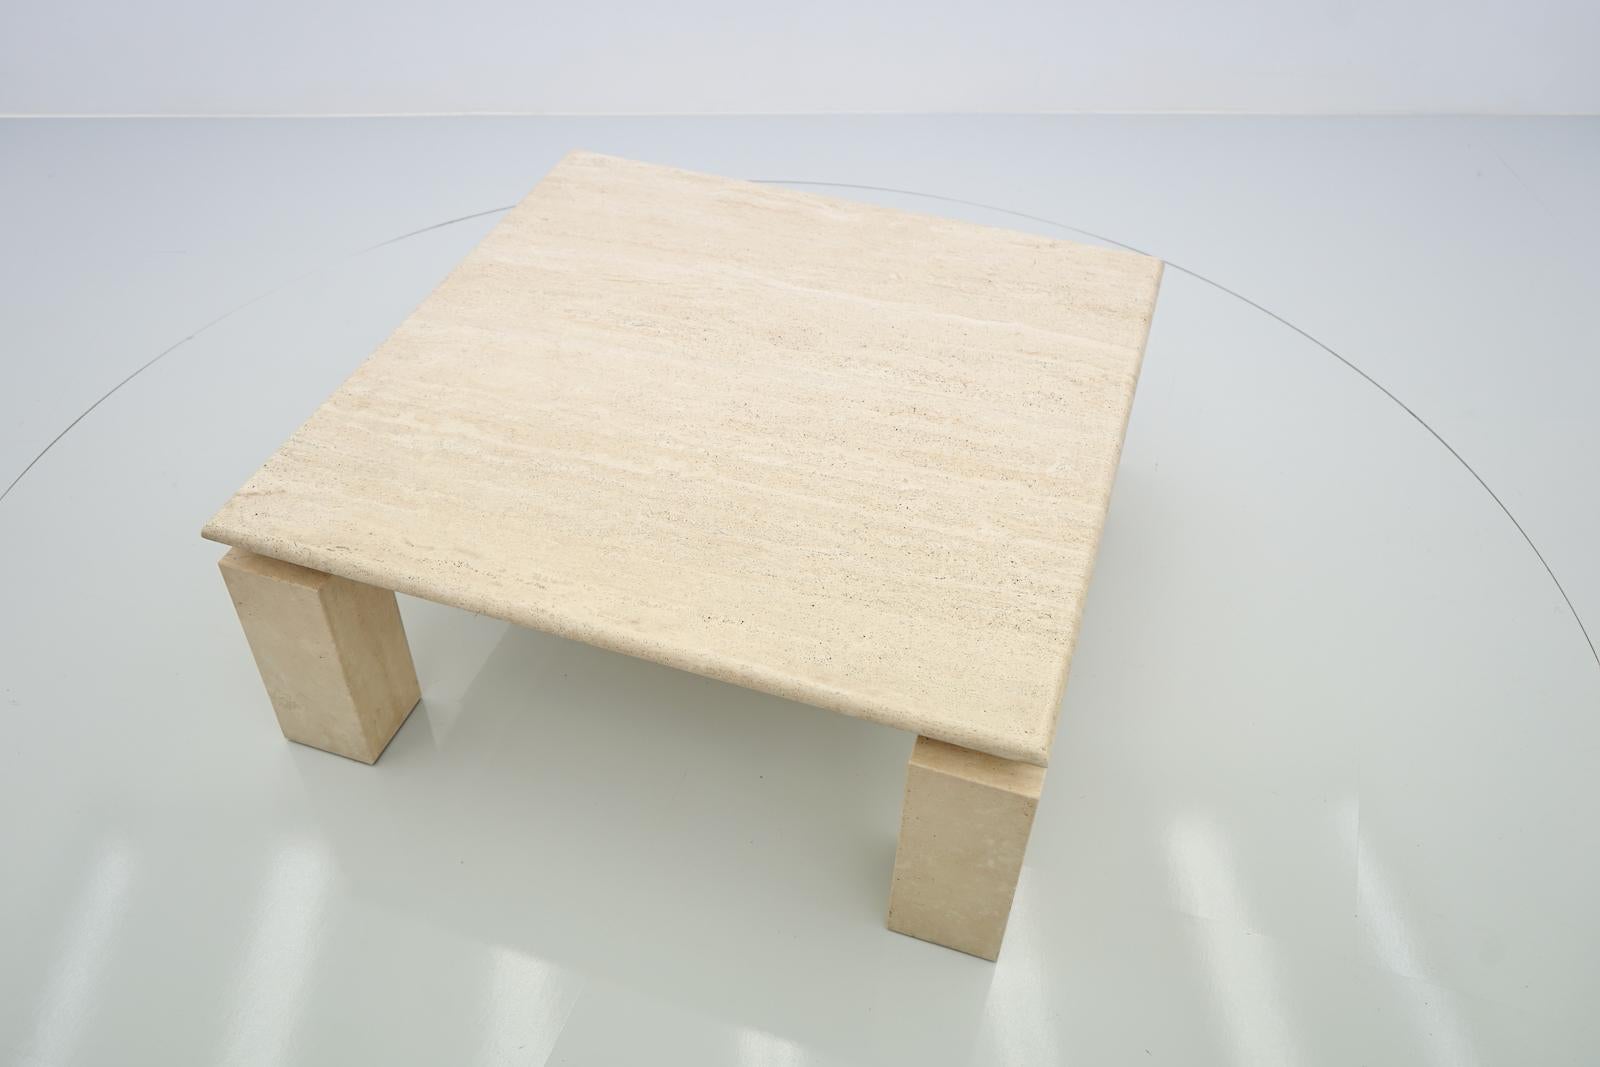 Late 20th Century Square Coffee Table in Italian Travertine with Floating Table Top, 1970s For Sale